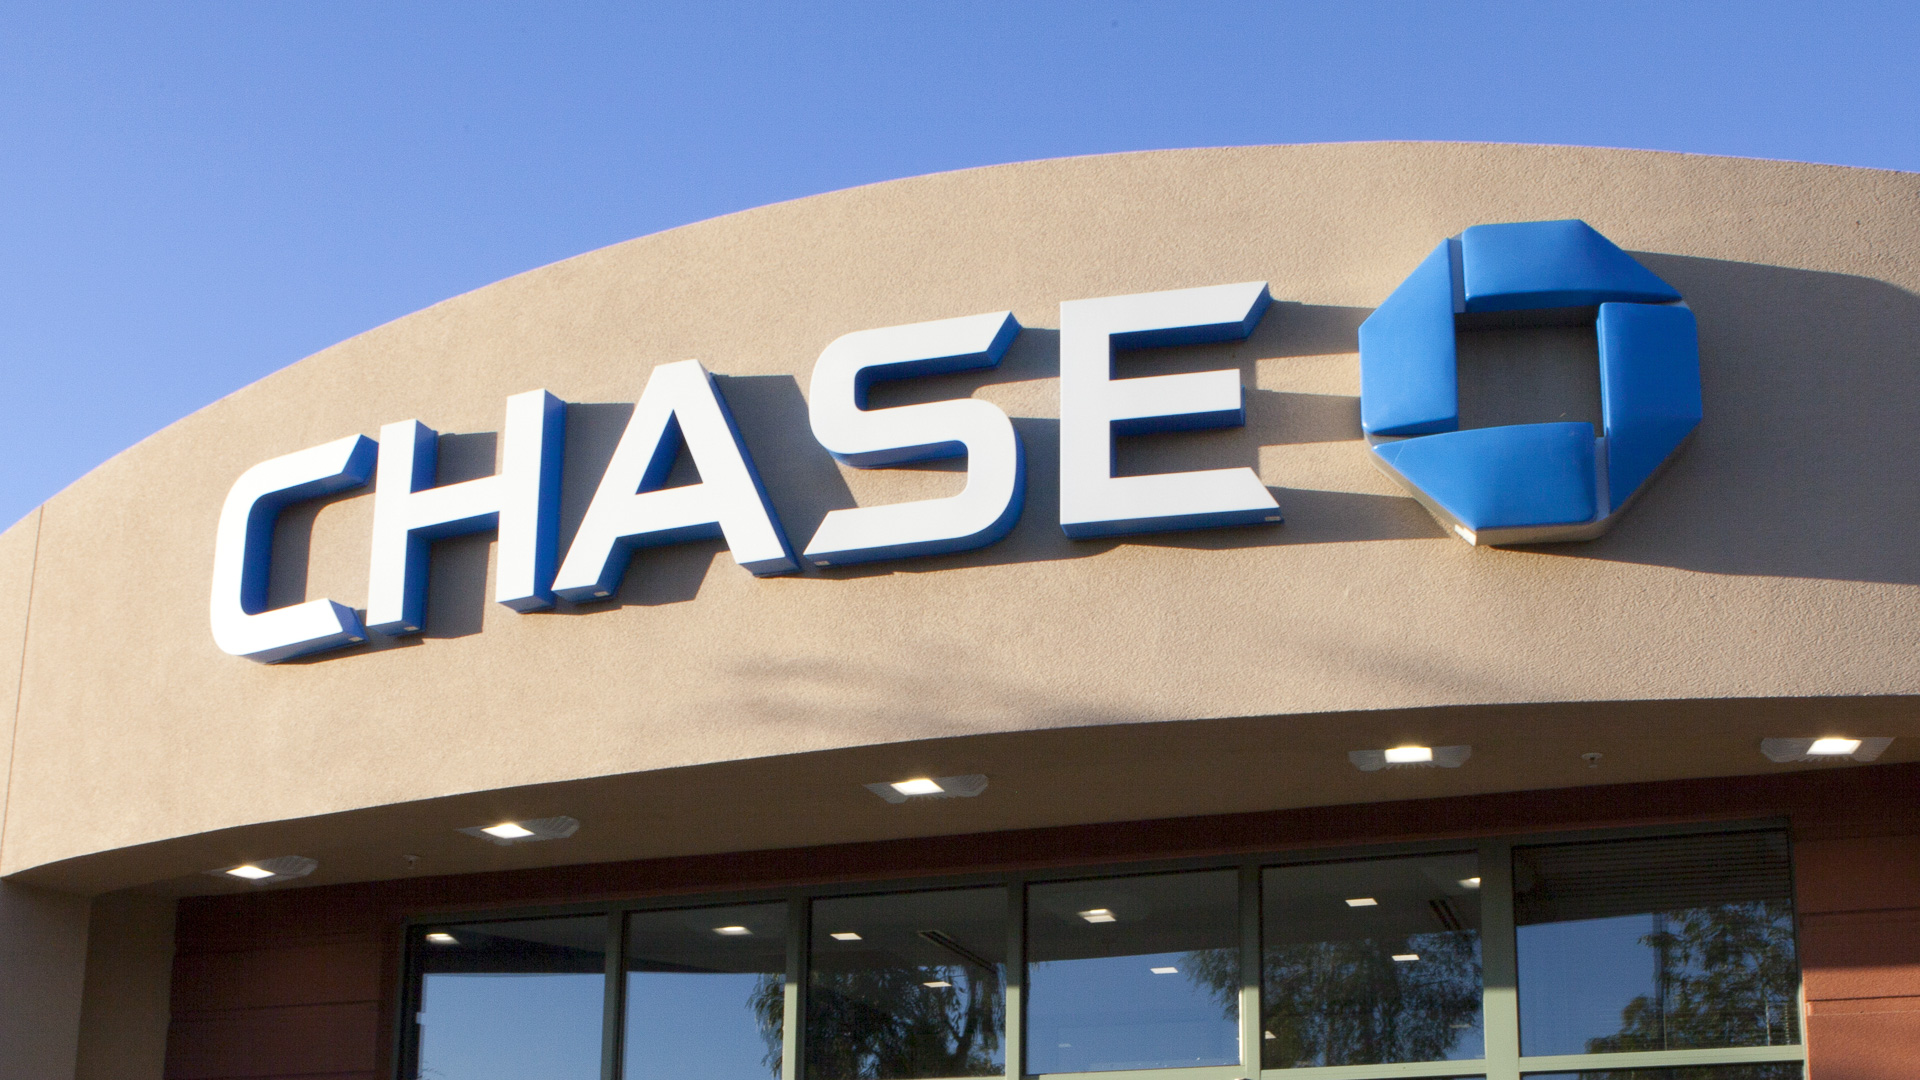 direct deposit form chase